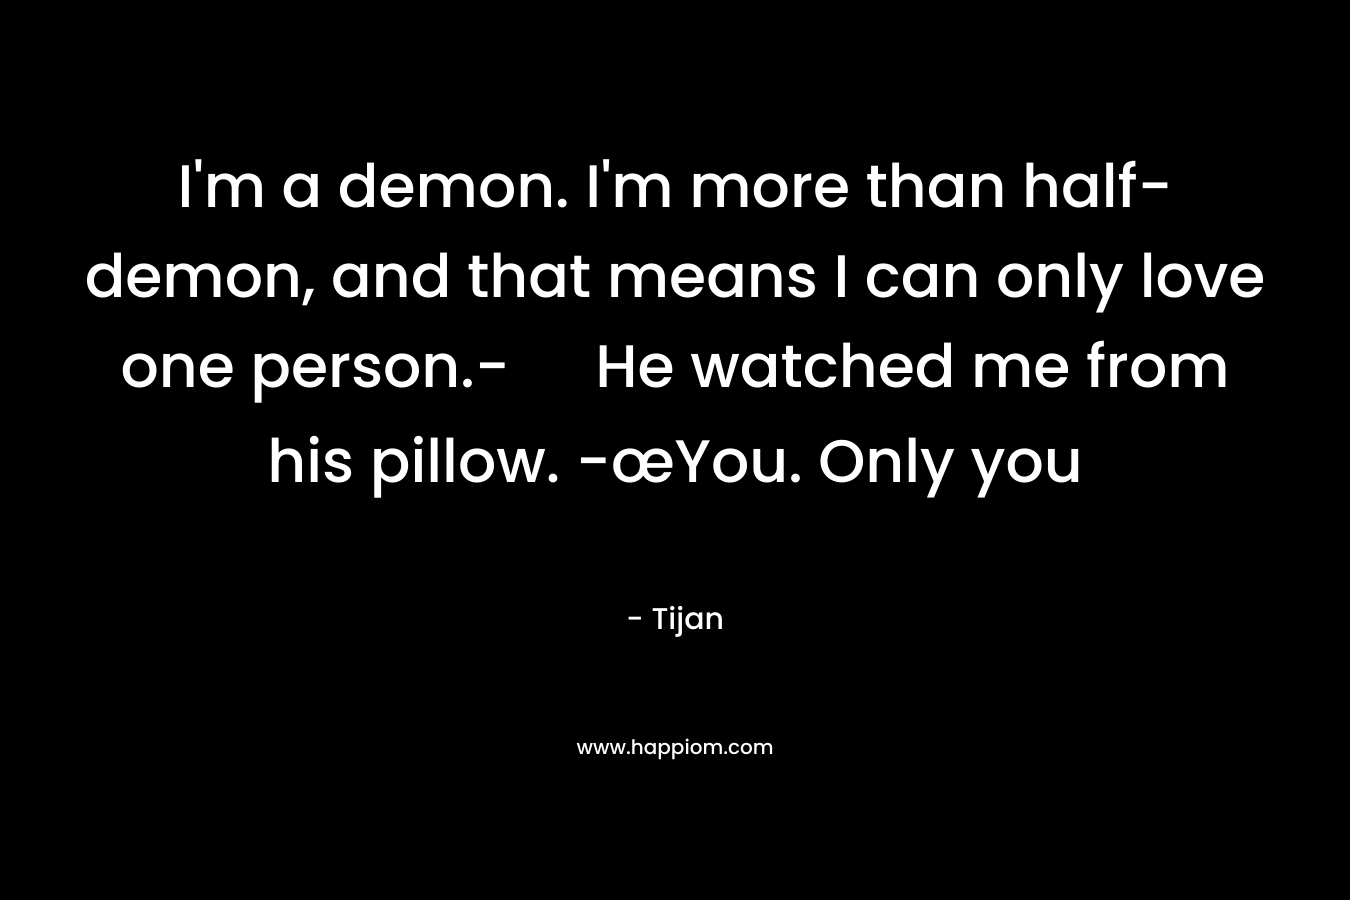 I'm a demon. I'm more than half-demon, and that means I can only love one person.- He watched me from his pillow. -œYou. Only you